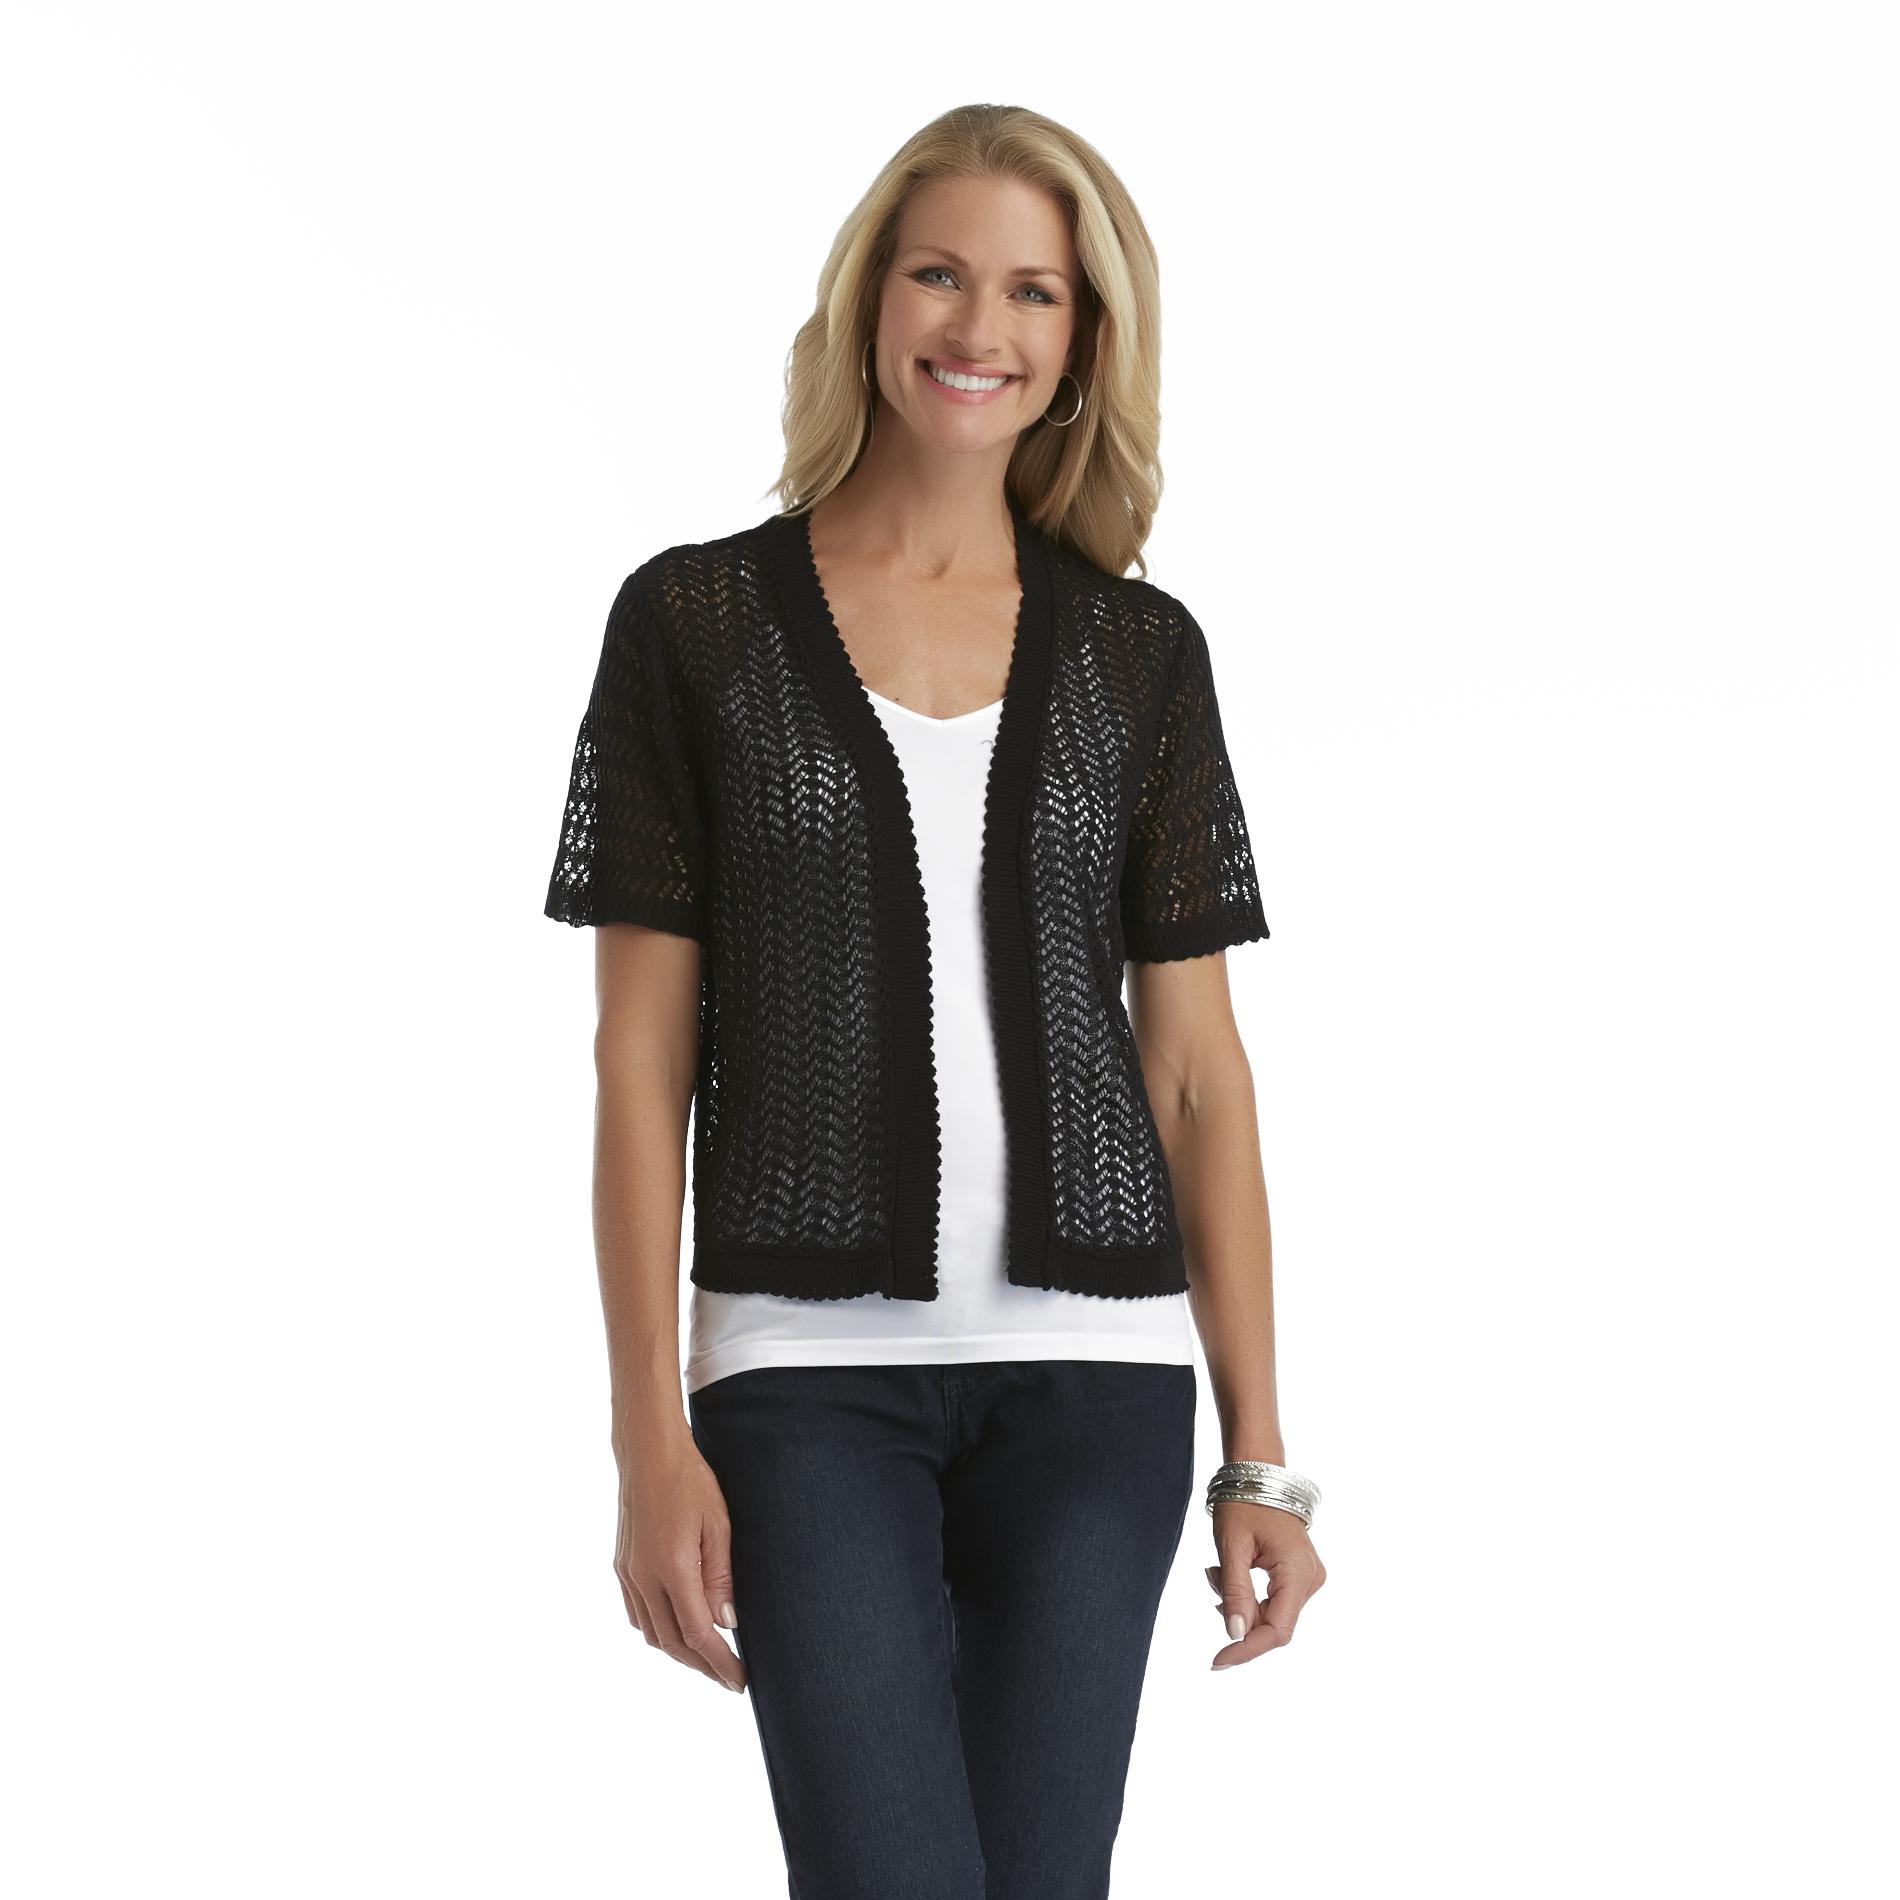 Basic Editions Women's Open-Front Pointelle Cardigan - Scalloped